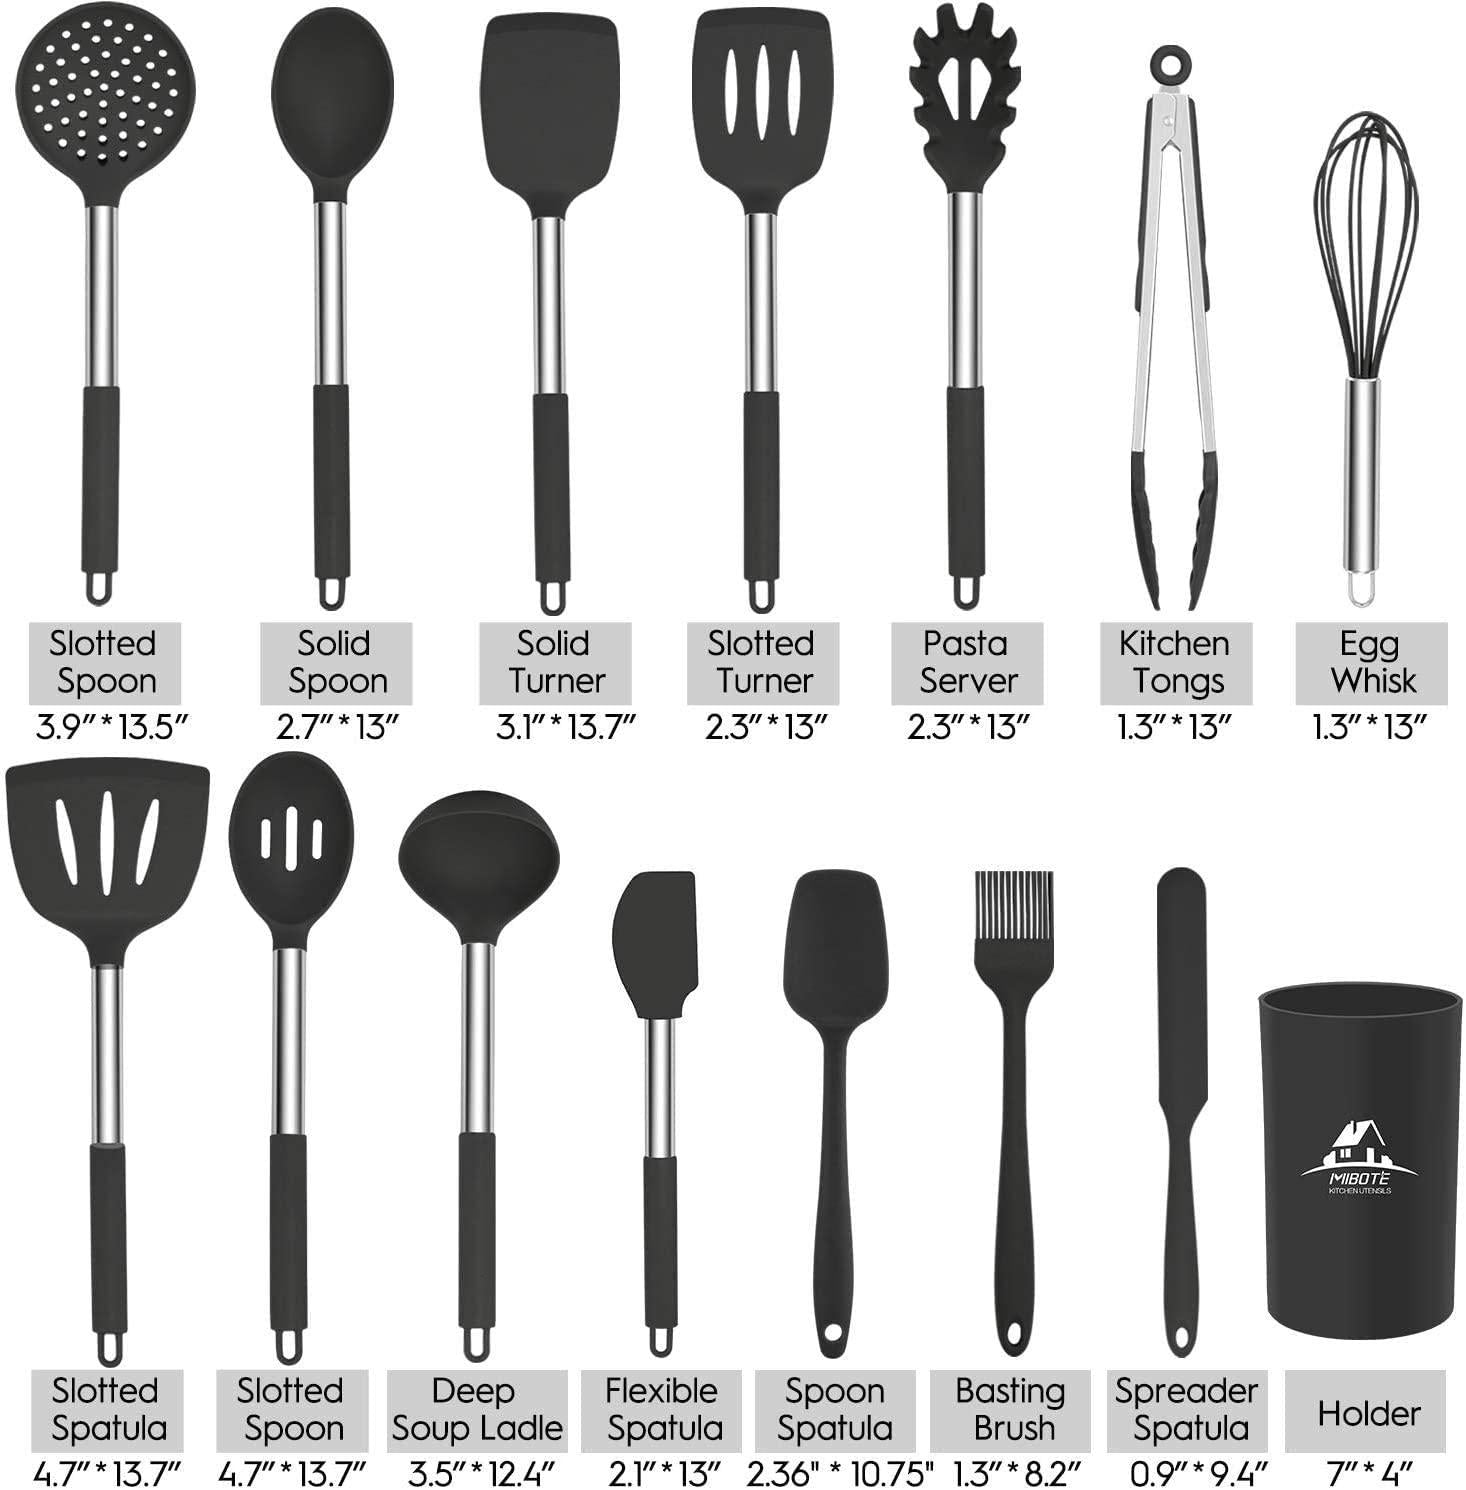 MIBOTE, Mibote 15 Pcs Silicone Kitchen Utensils Set, Cooking Utensils Set with Heat Resistant BPA-Free Silicone and Stainless Steel Handle Kitchen Tools Set (Black)